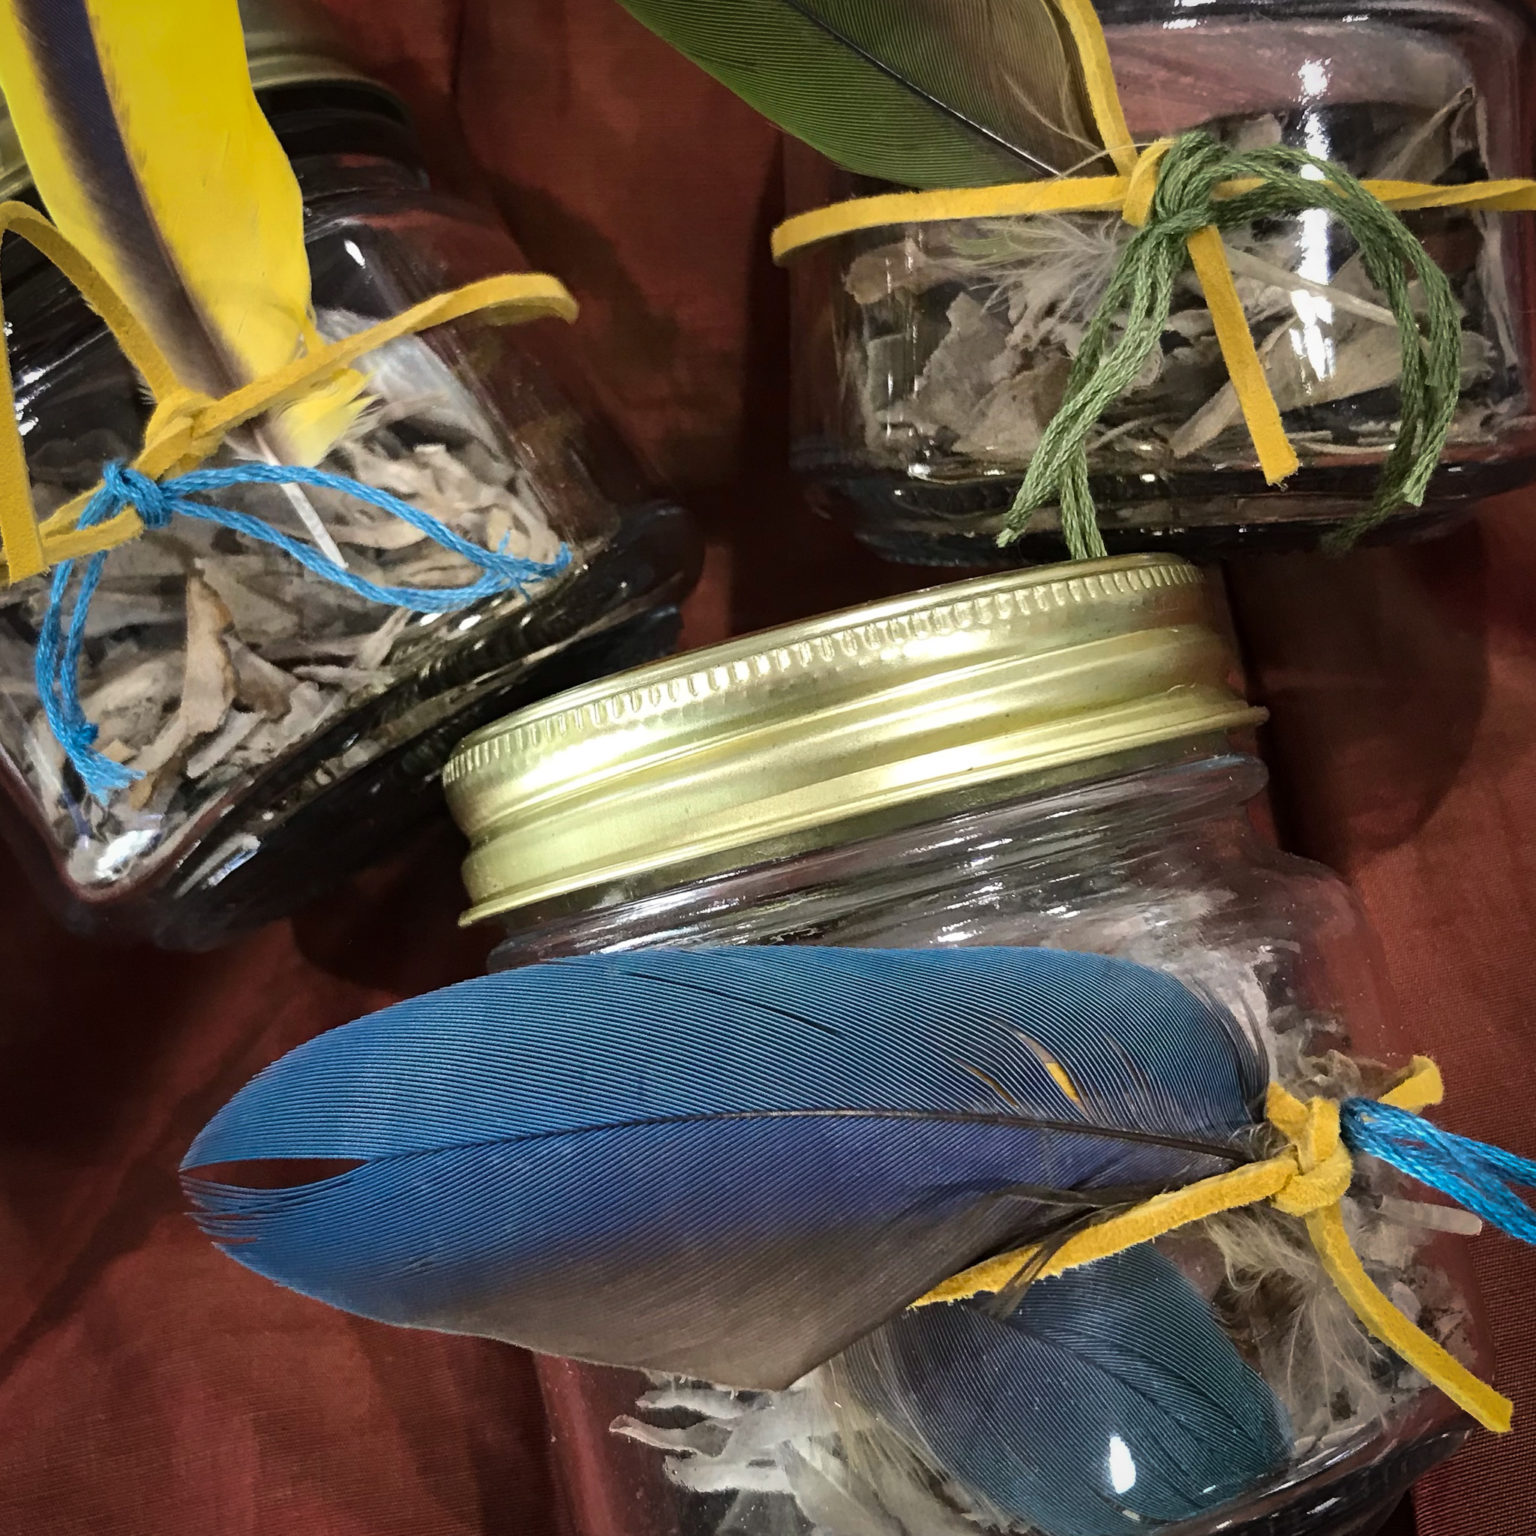 Herb jars with parrot feathers.